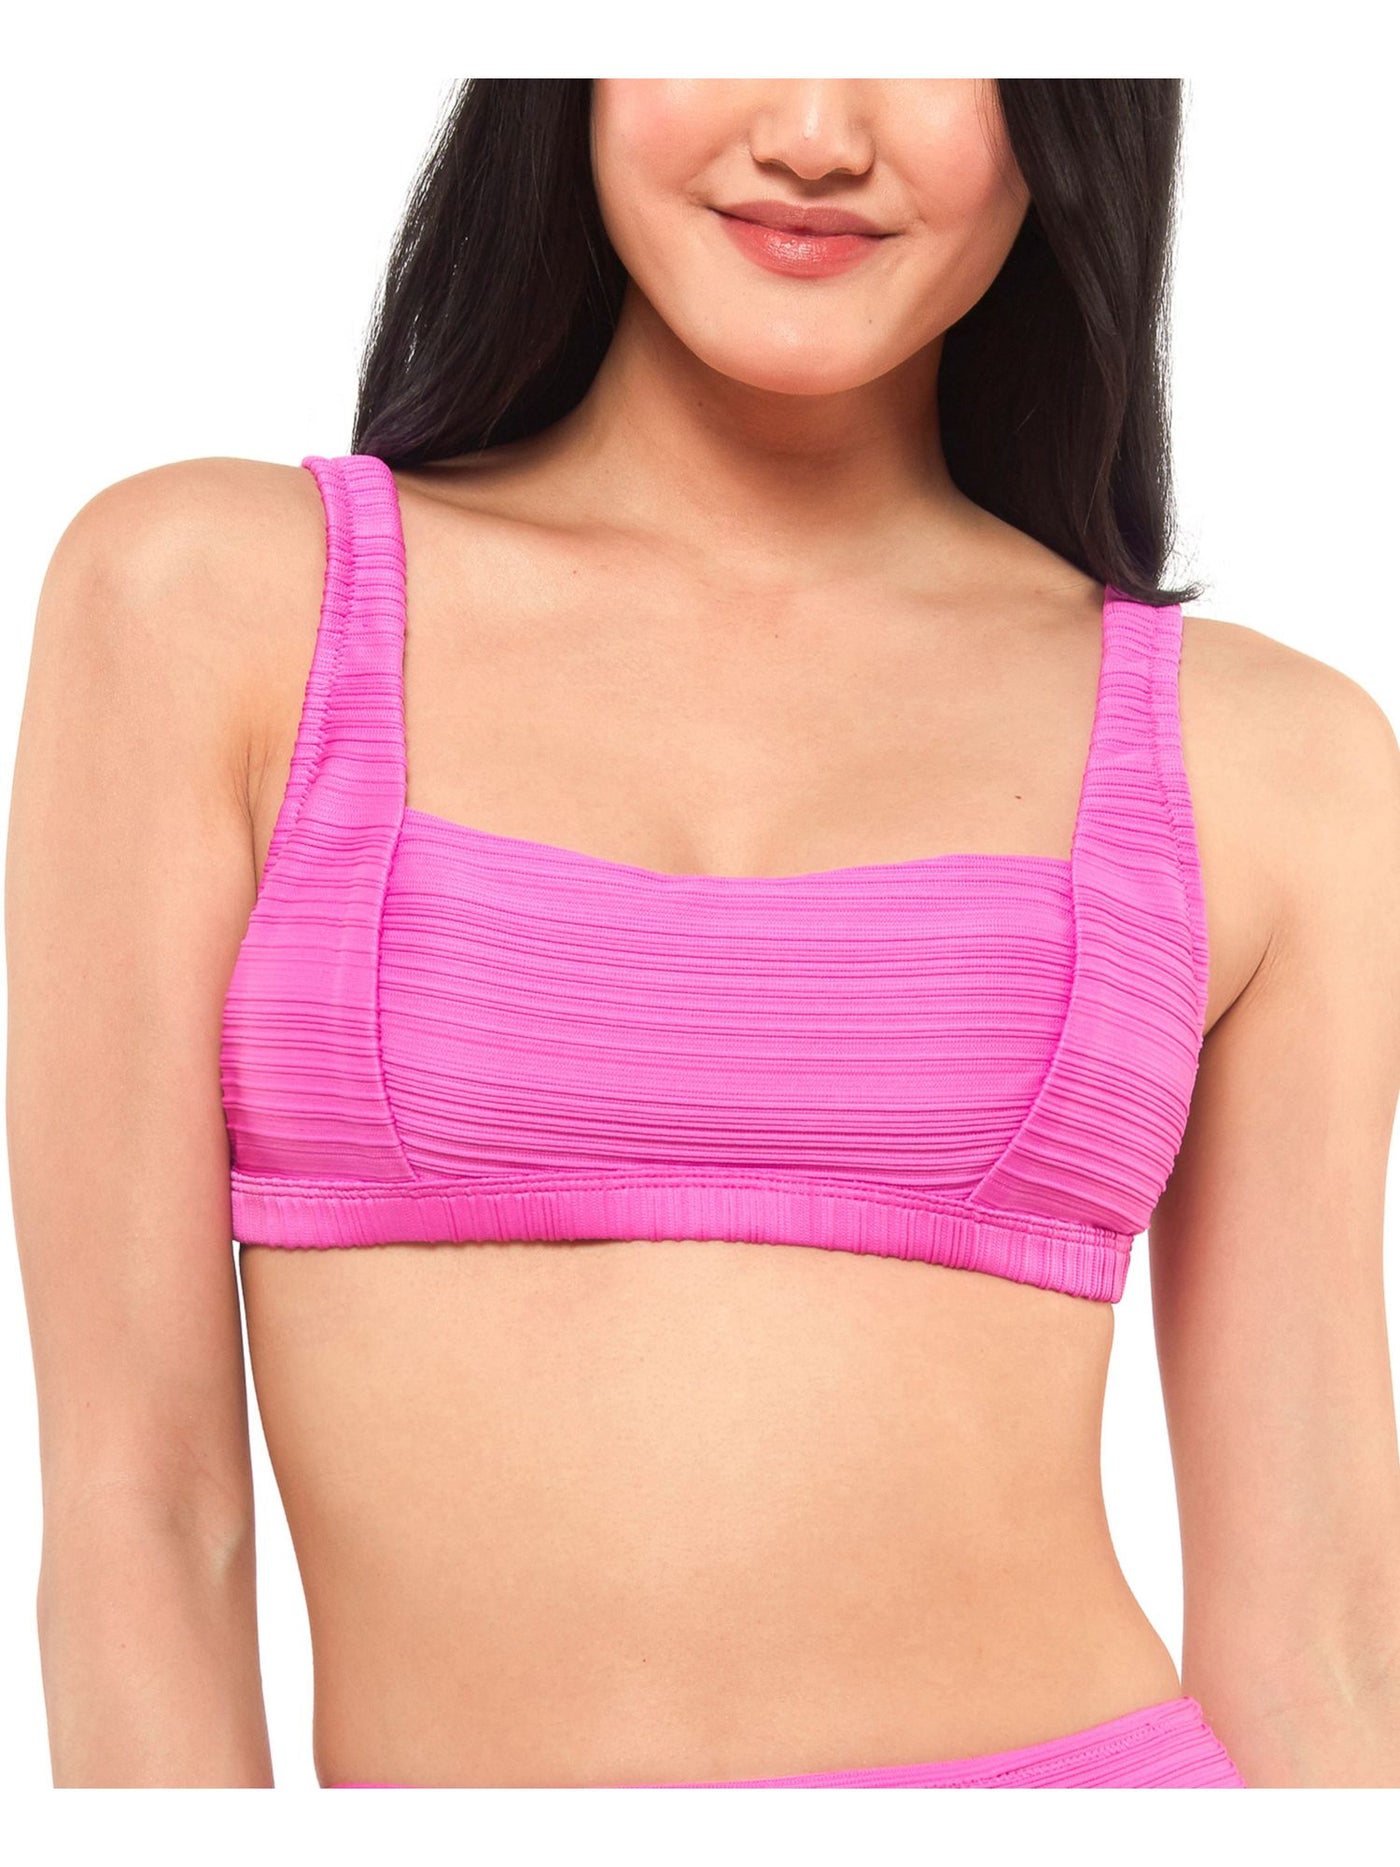 JESSICA SIMPSON Women's Pink Removable Push-Up Cups Ribbed Tie Square Neck Swimsuit Top XL